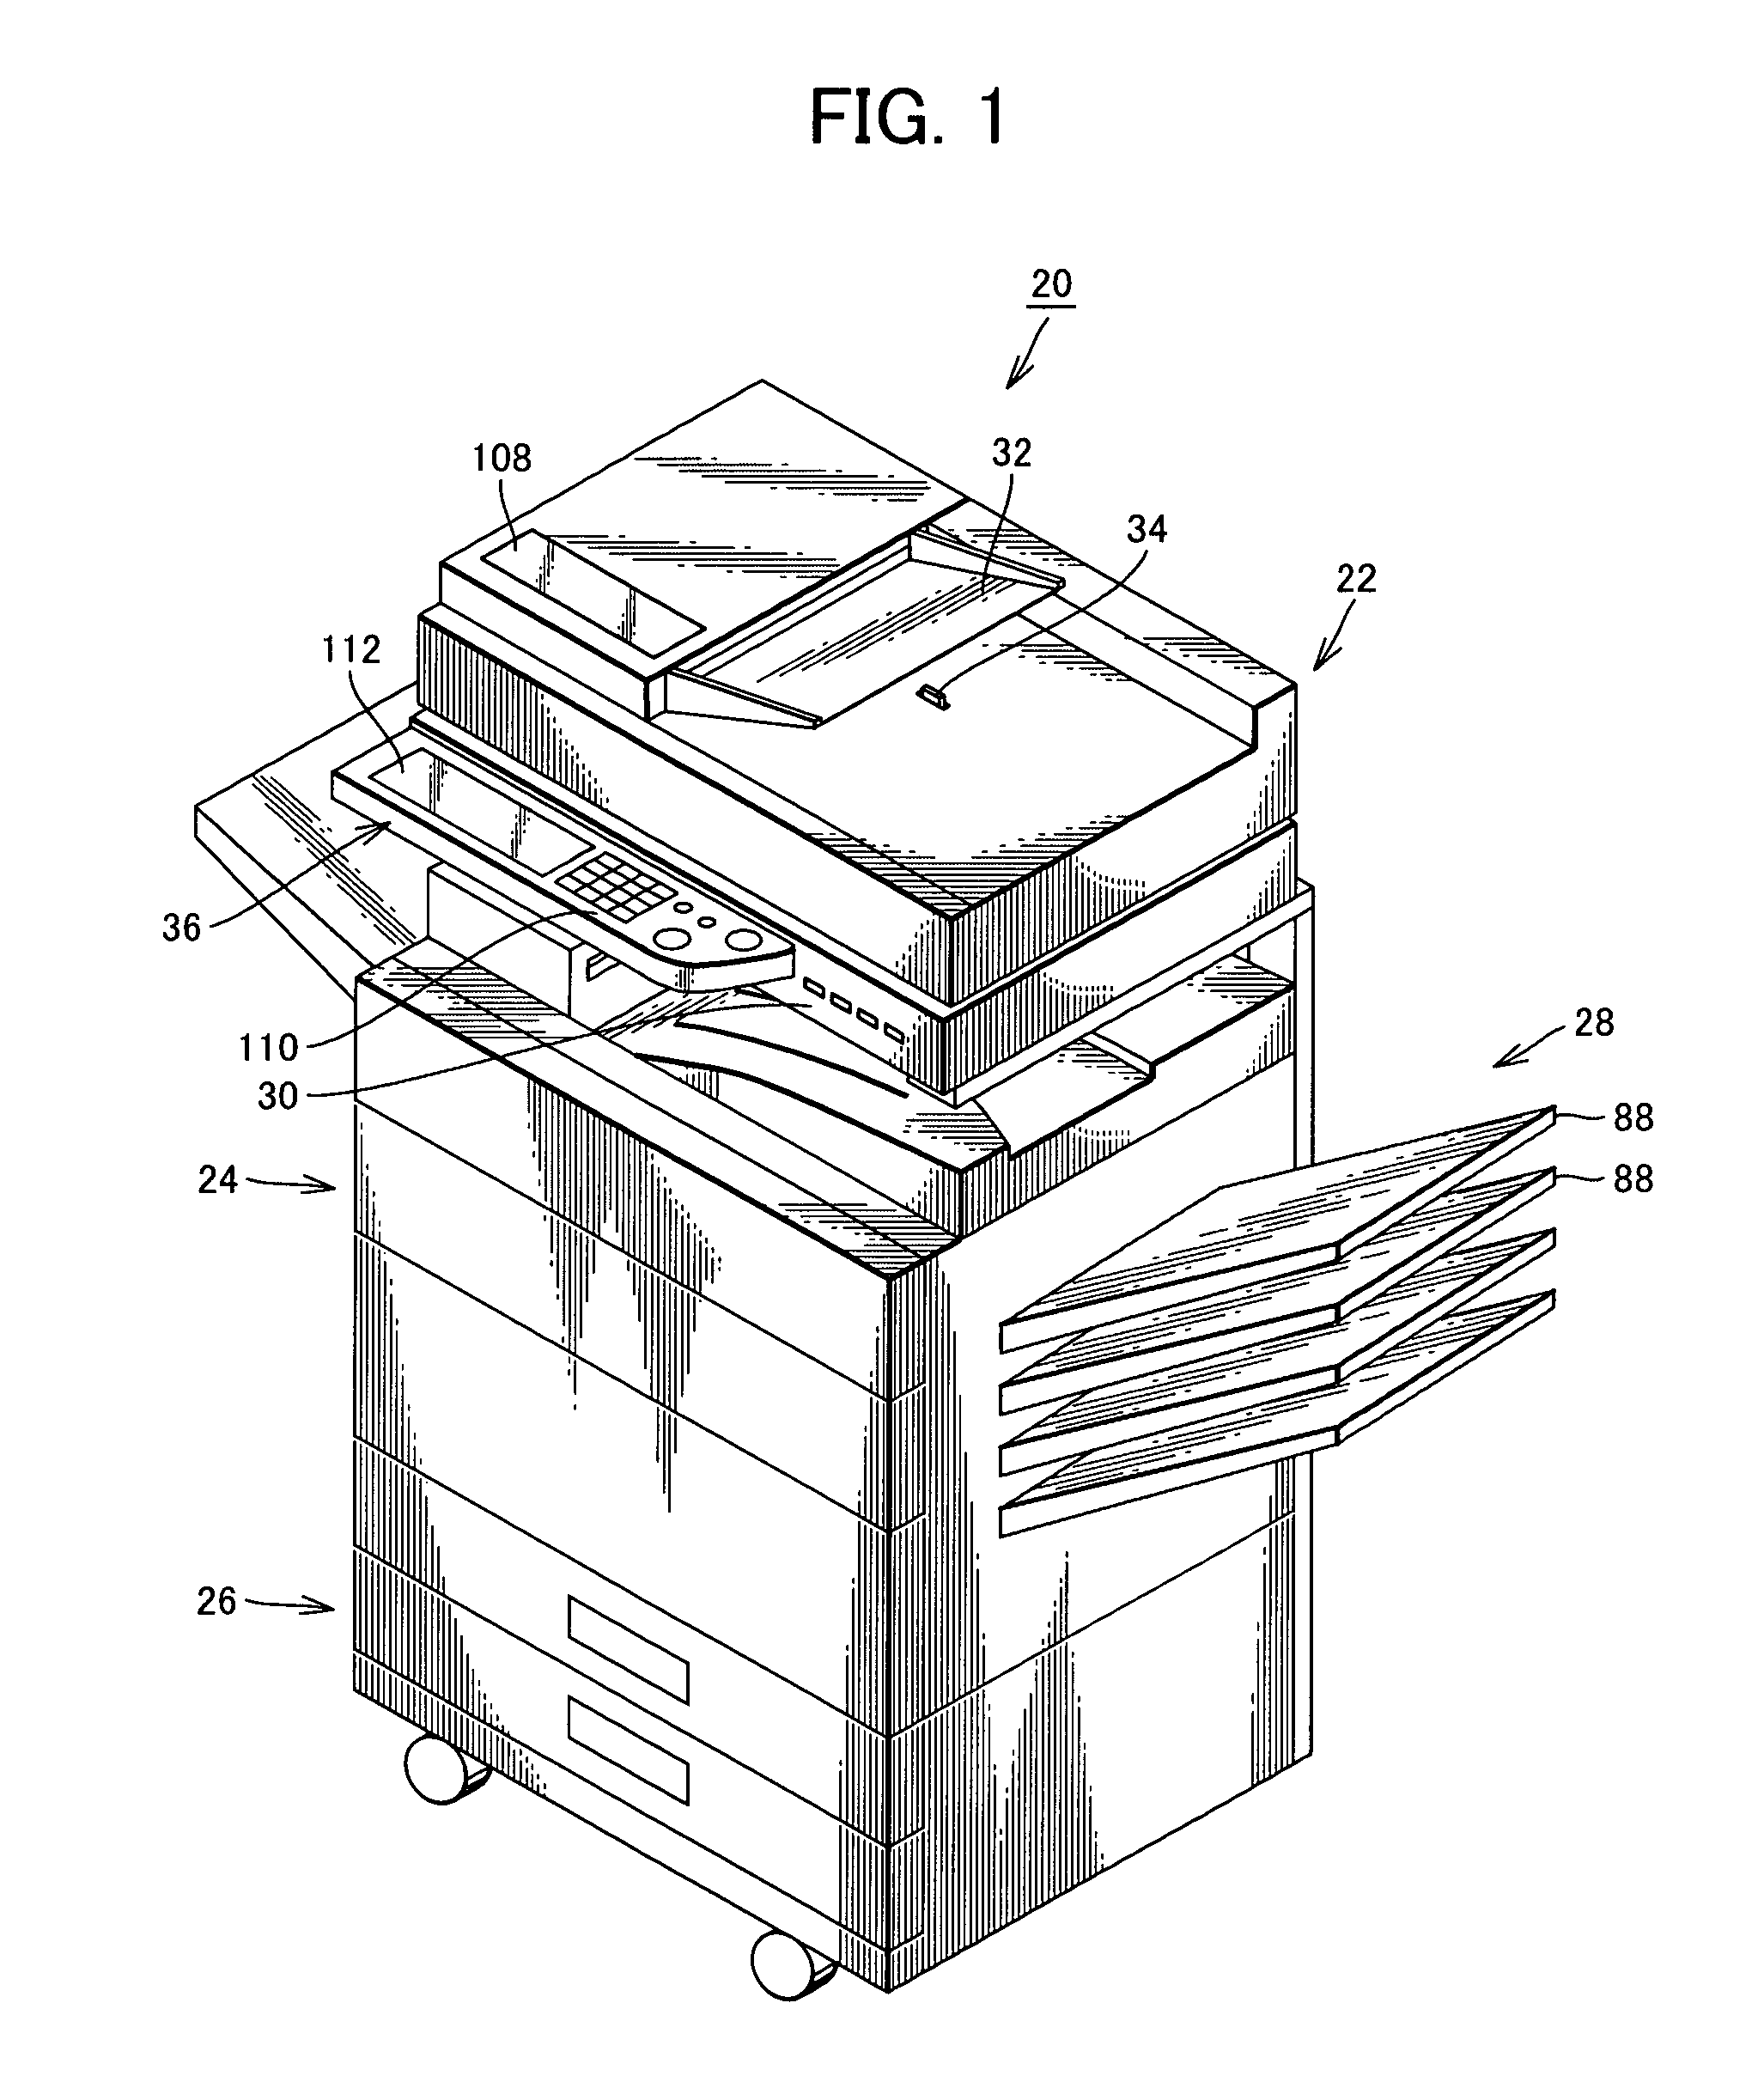 Image forming apparatus providing user support in sleep mode